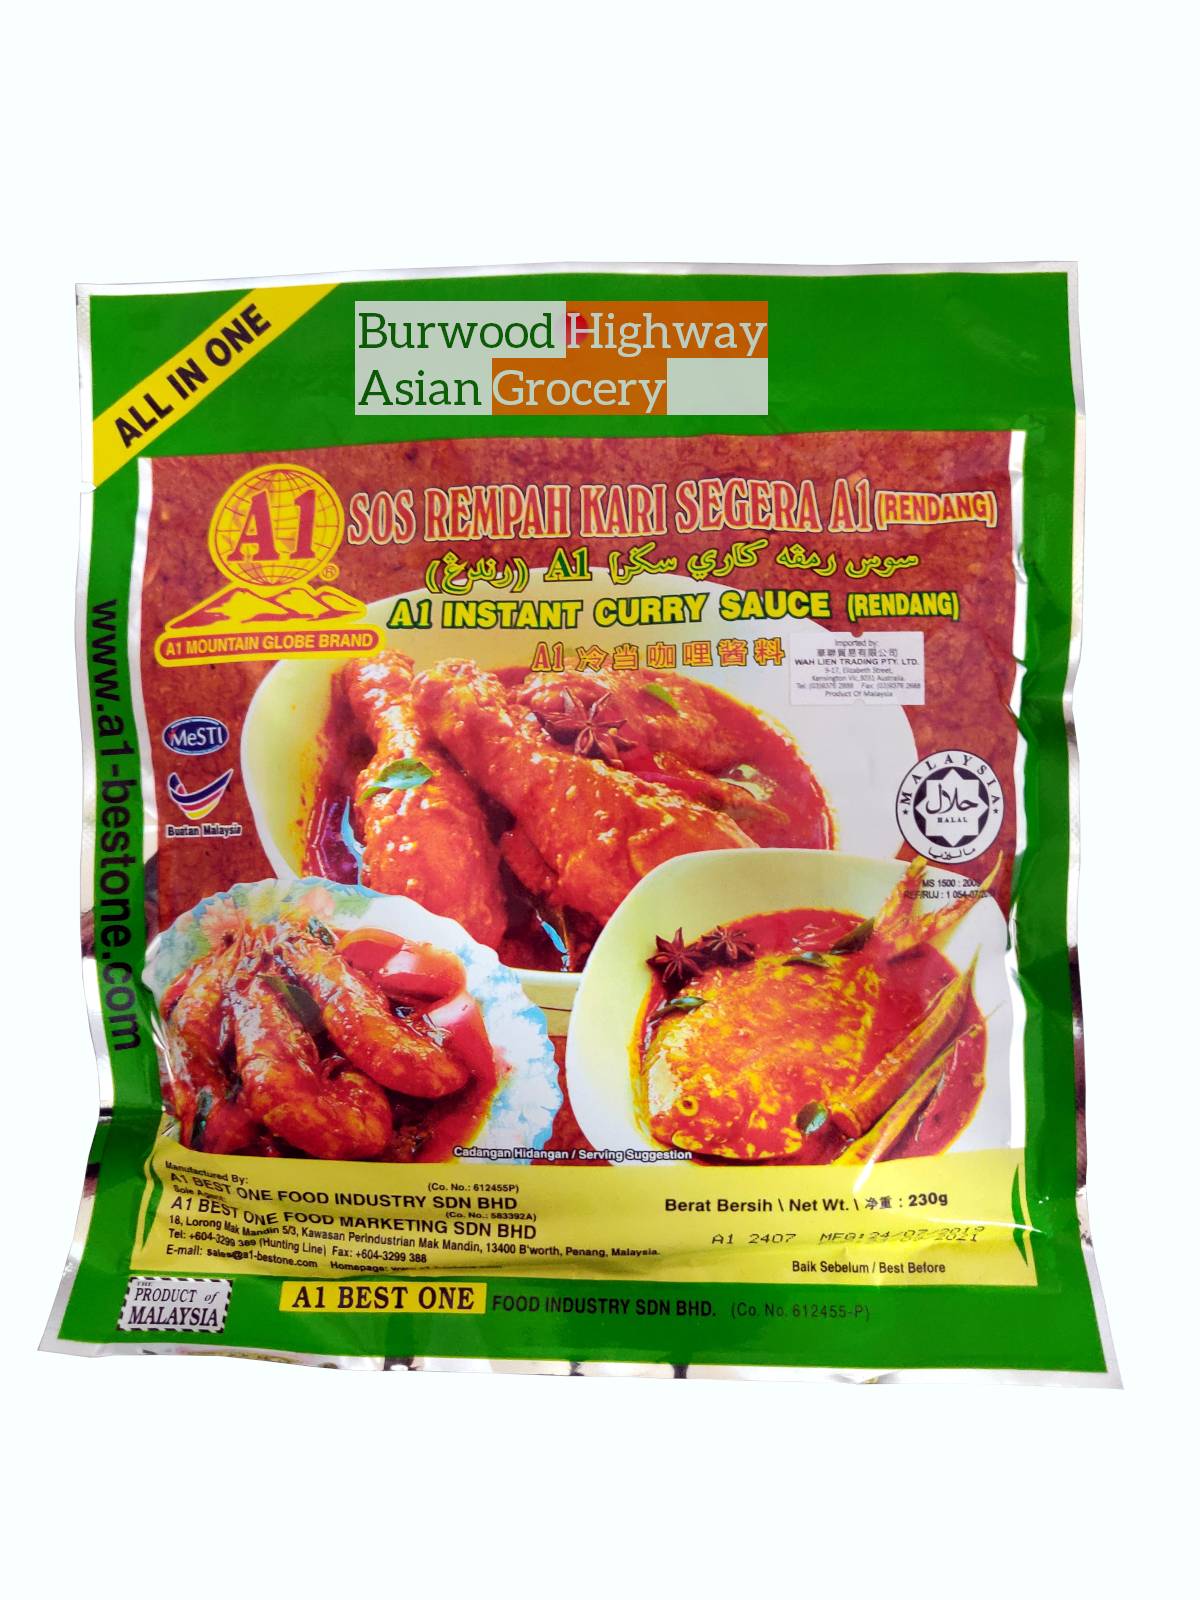 A1 Best One Instant Curry Sauce (Rendang) 230g - Burwood Highway Asian ...